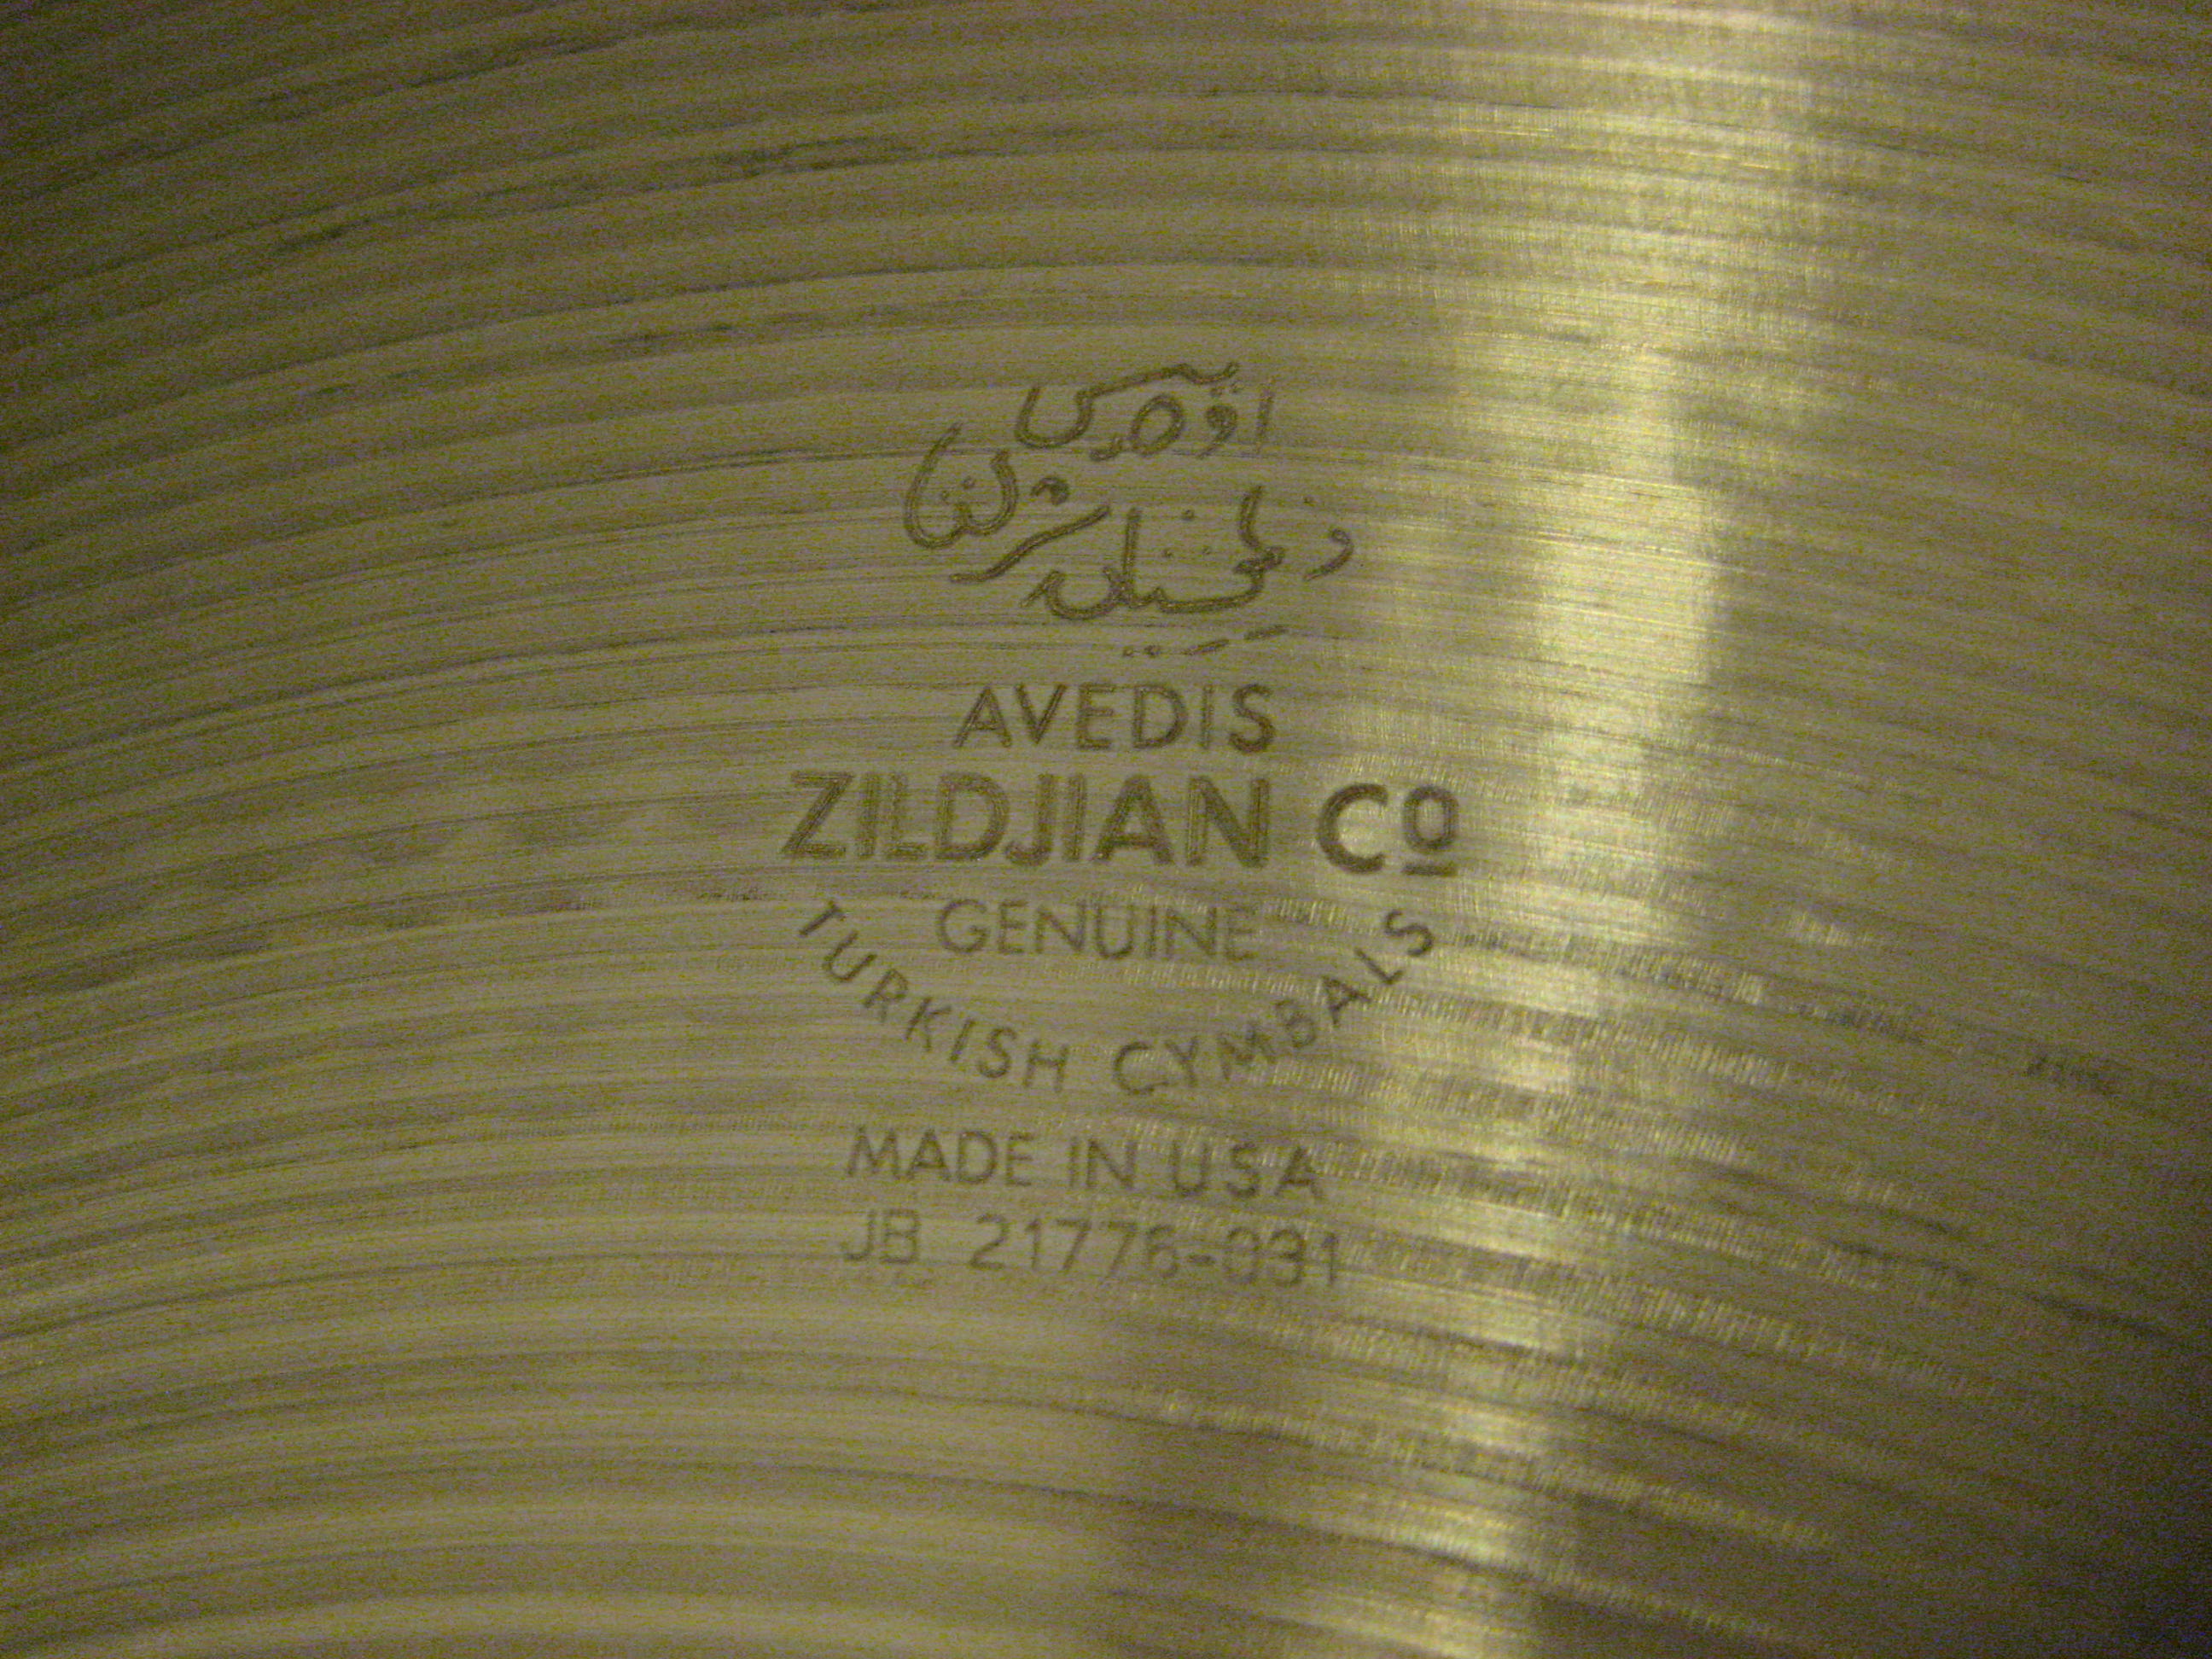 The Zildjian cymbal company is one of the oldest businesses in the world -  100 Years, 100 Facts about Armenia to commemorate the centennial of the  Armenian Genocide100 Years, 100 Facts about